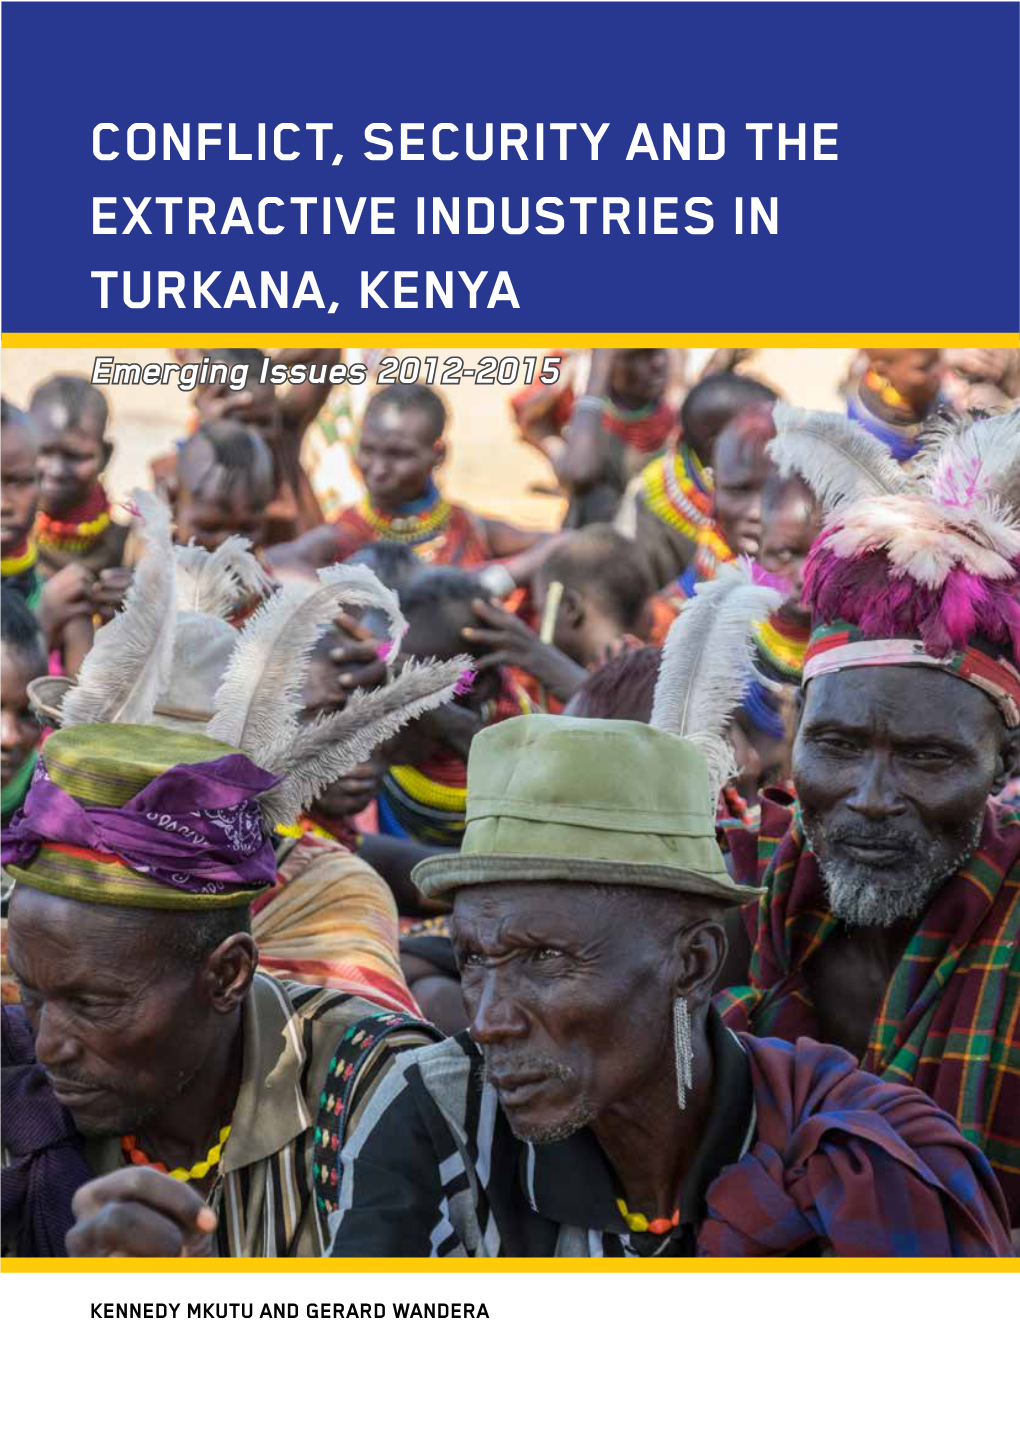 Conflict, Security and the Extractive Industries in Turkana, Kenya Emerging Issues 2012-2015